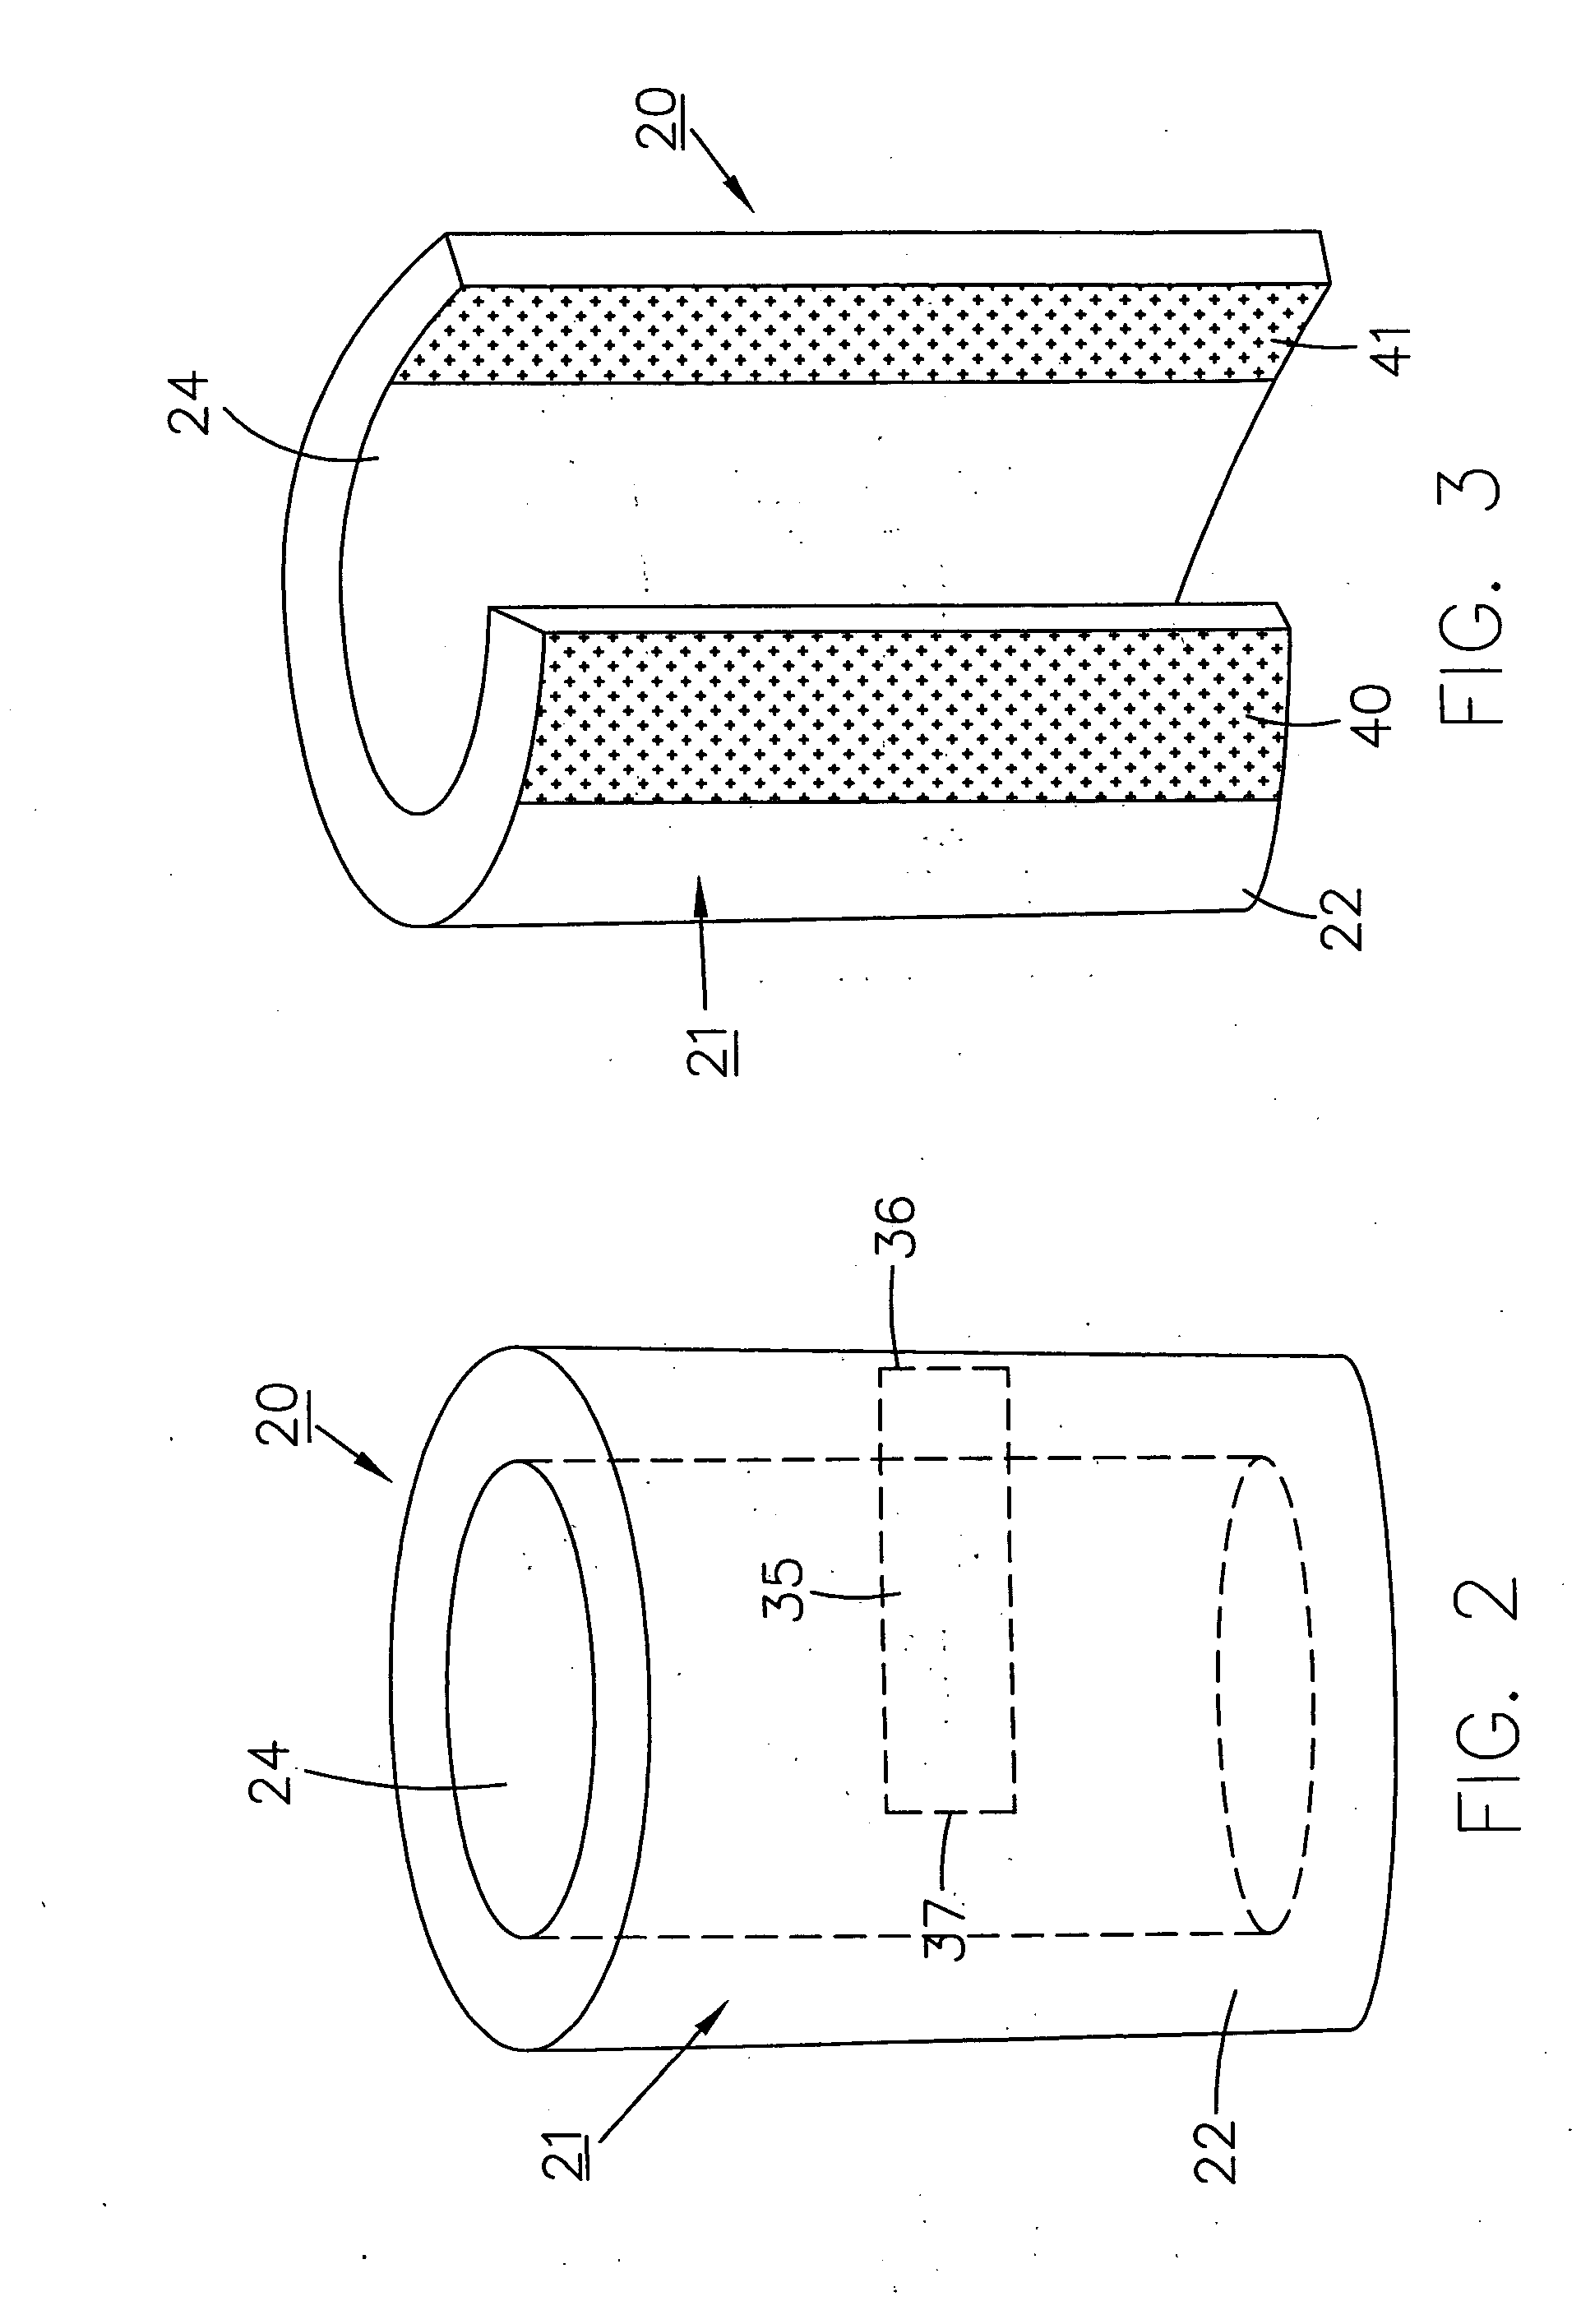 Multi-purpose combined drug delivery and heat therapy treatment system